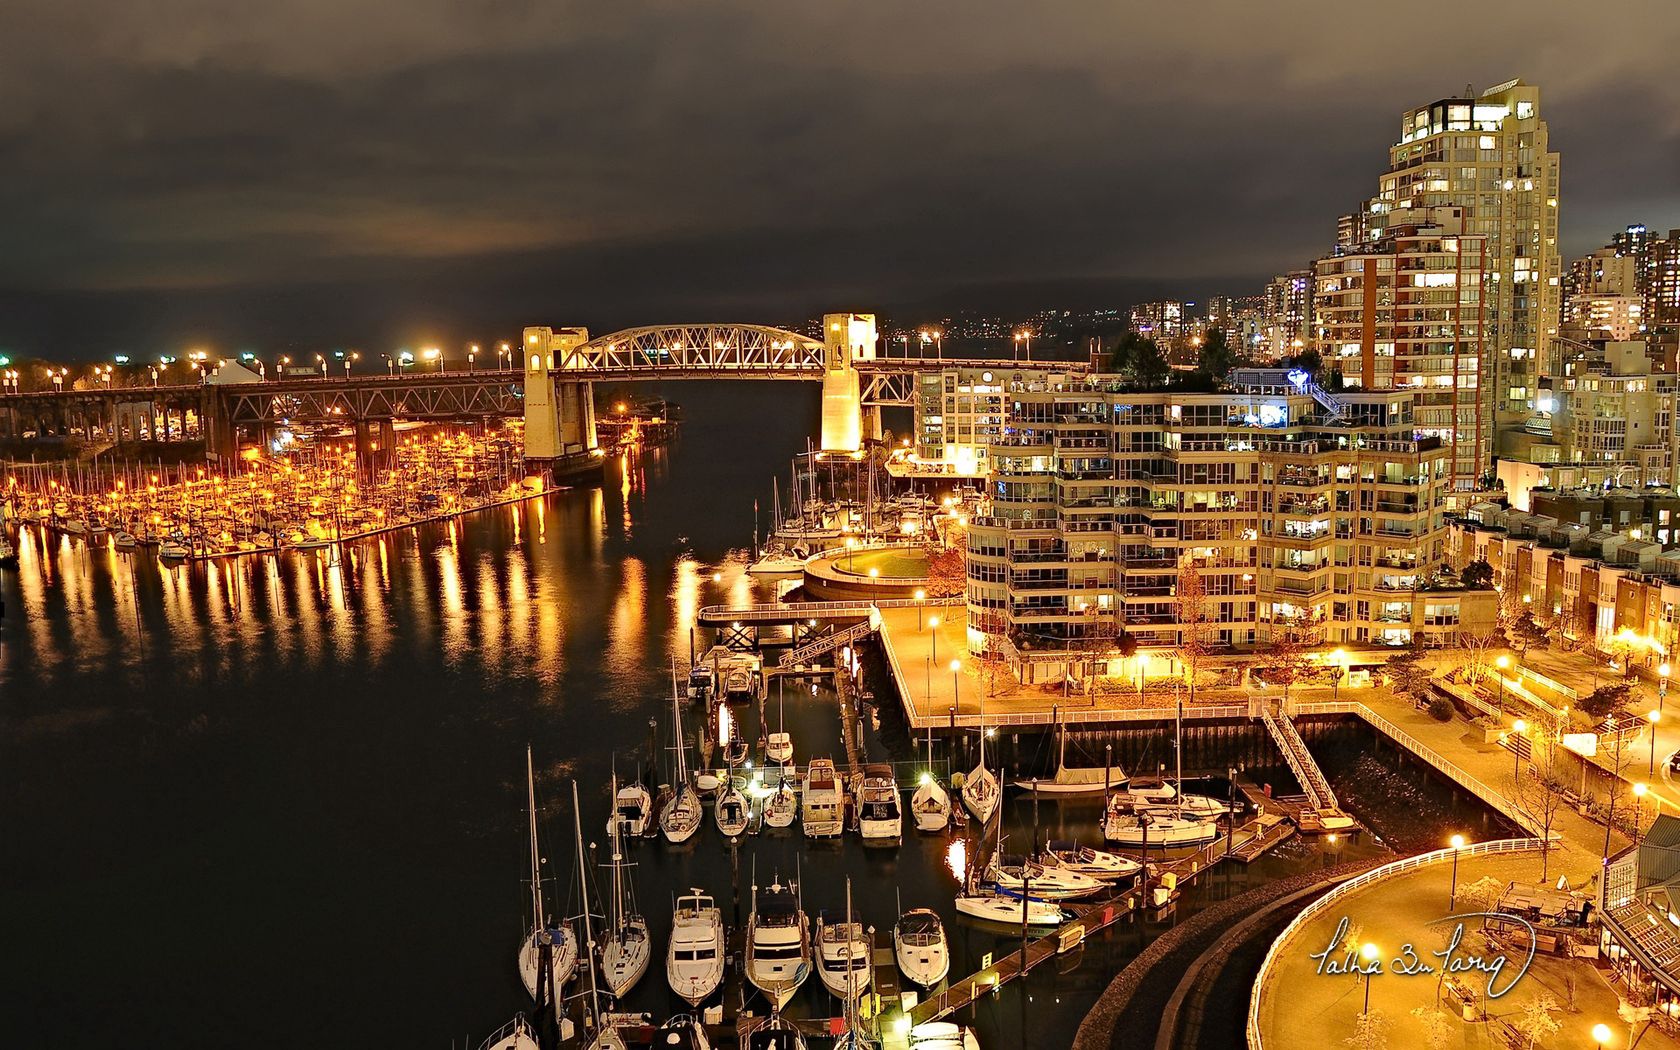 vancouver, cities, night, city, building, shine, light, pier High Definition image